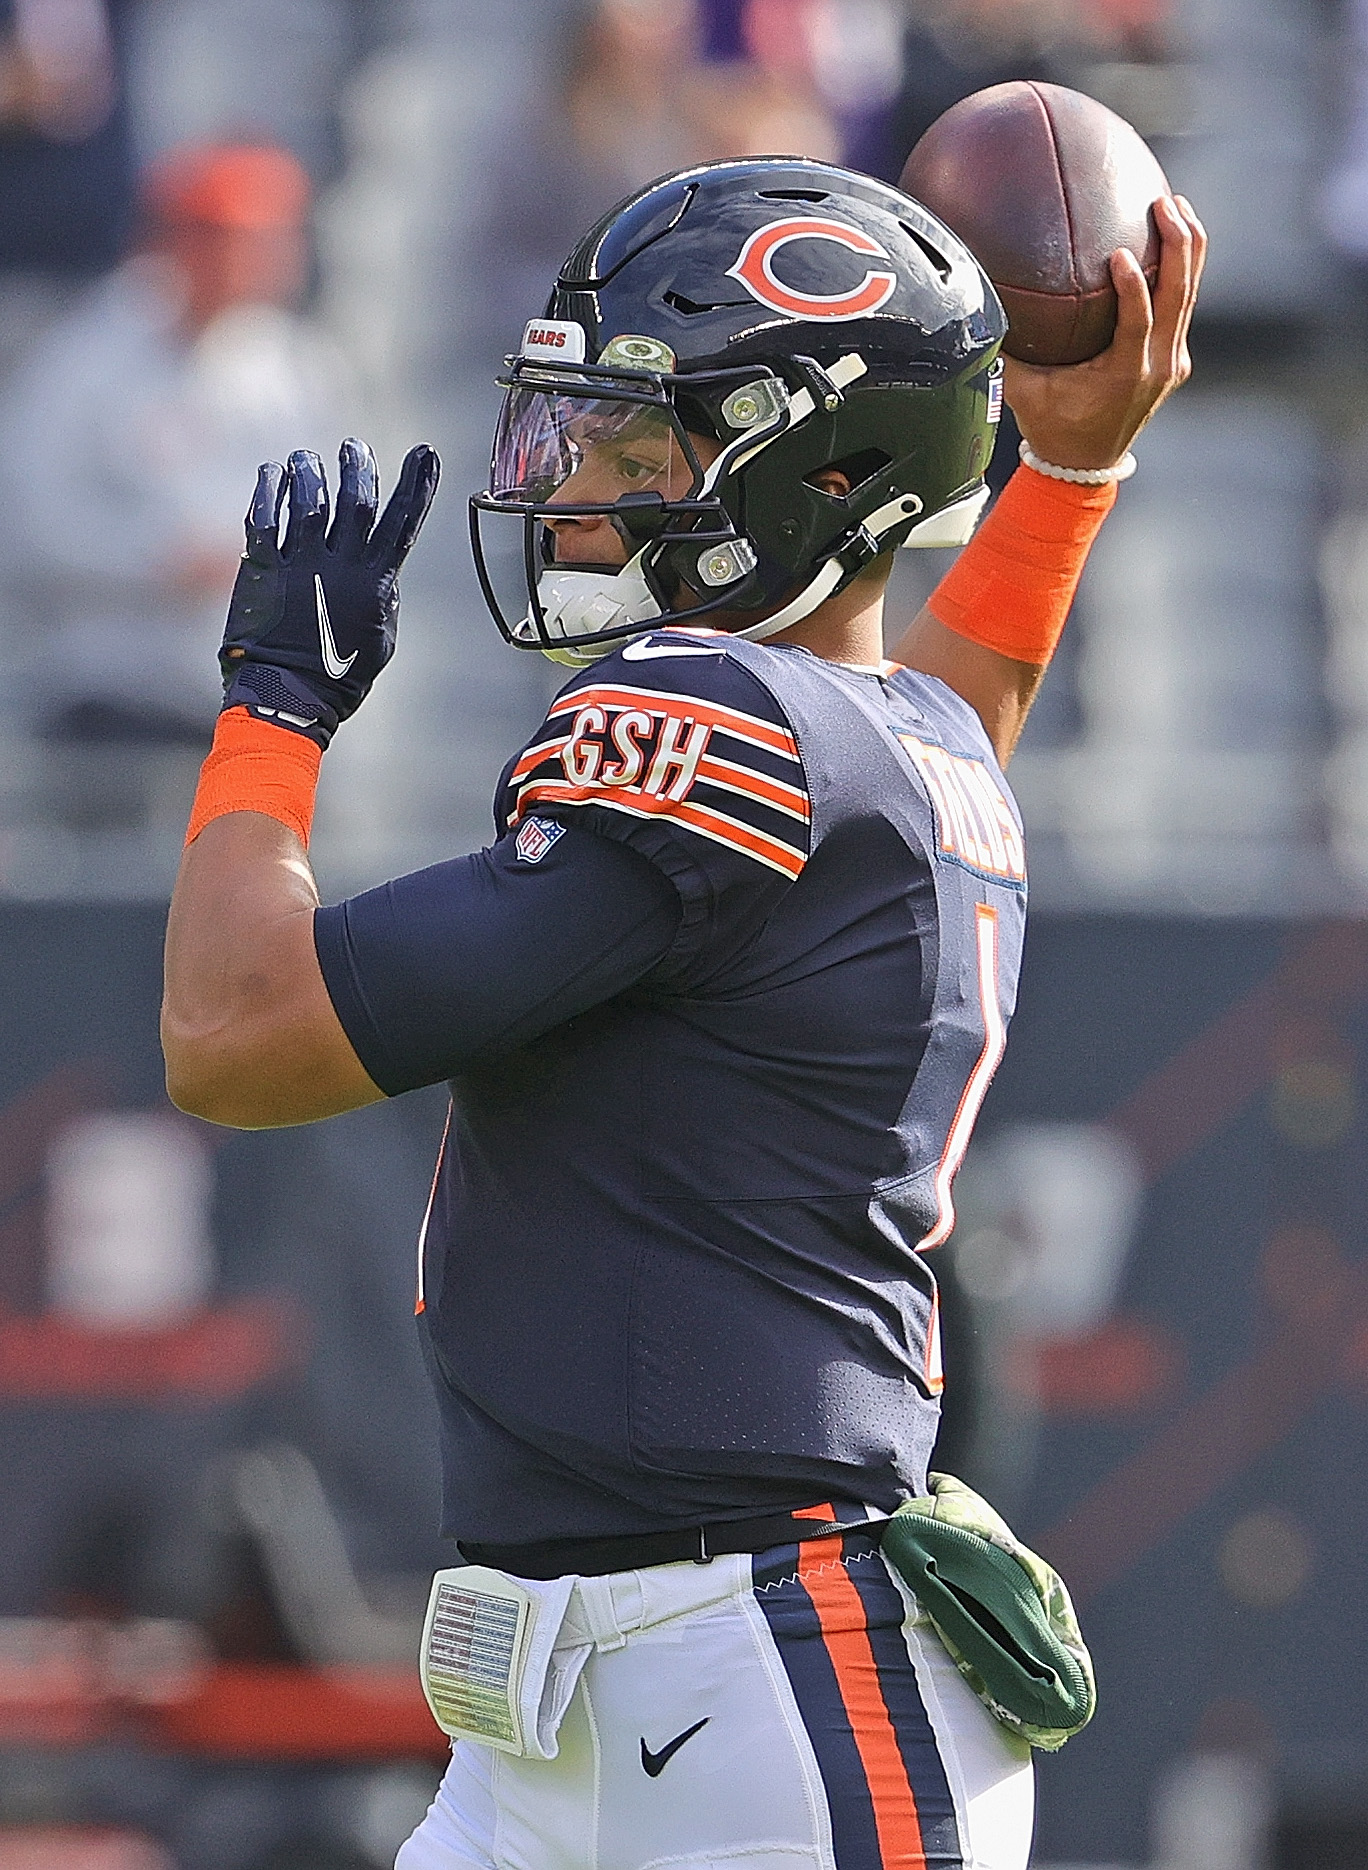 CHICAGO, ILLINOIS - NOVEMBER 21: Justin Fields #1 of the Chicago Bears participates in warm-ups before a game against the Baltimore Ravens at Soldier Field on November 21, 2021 in Chicago, Illinois. The Ravens defeated the Bears 16-13. (Photo by Jonathan Daniel/Getty Images)